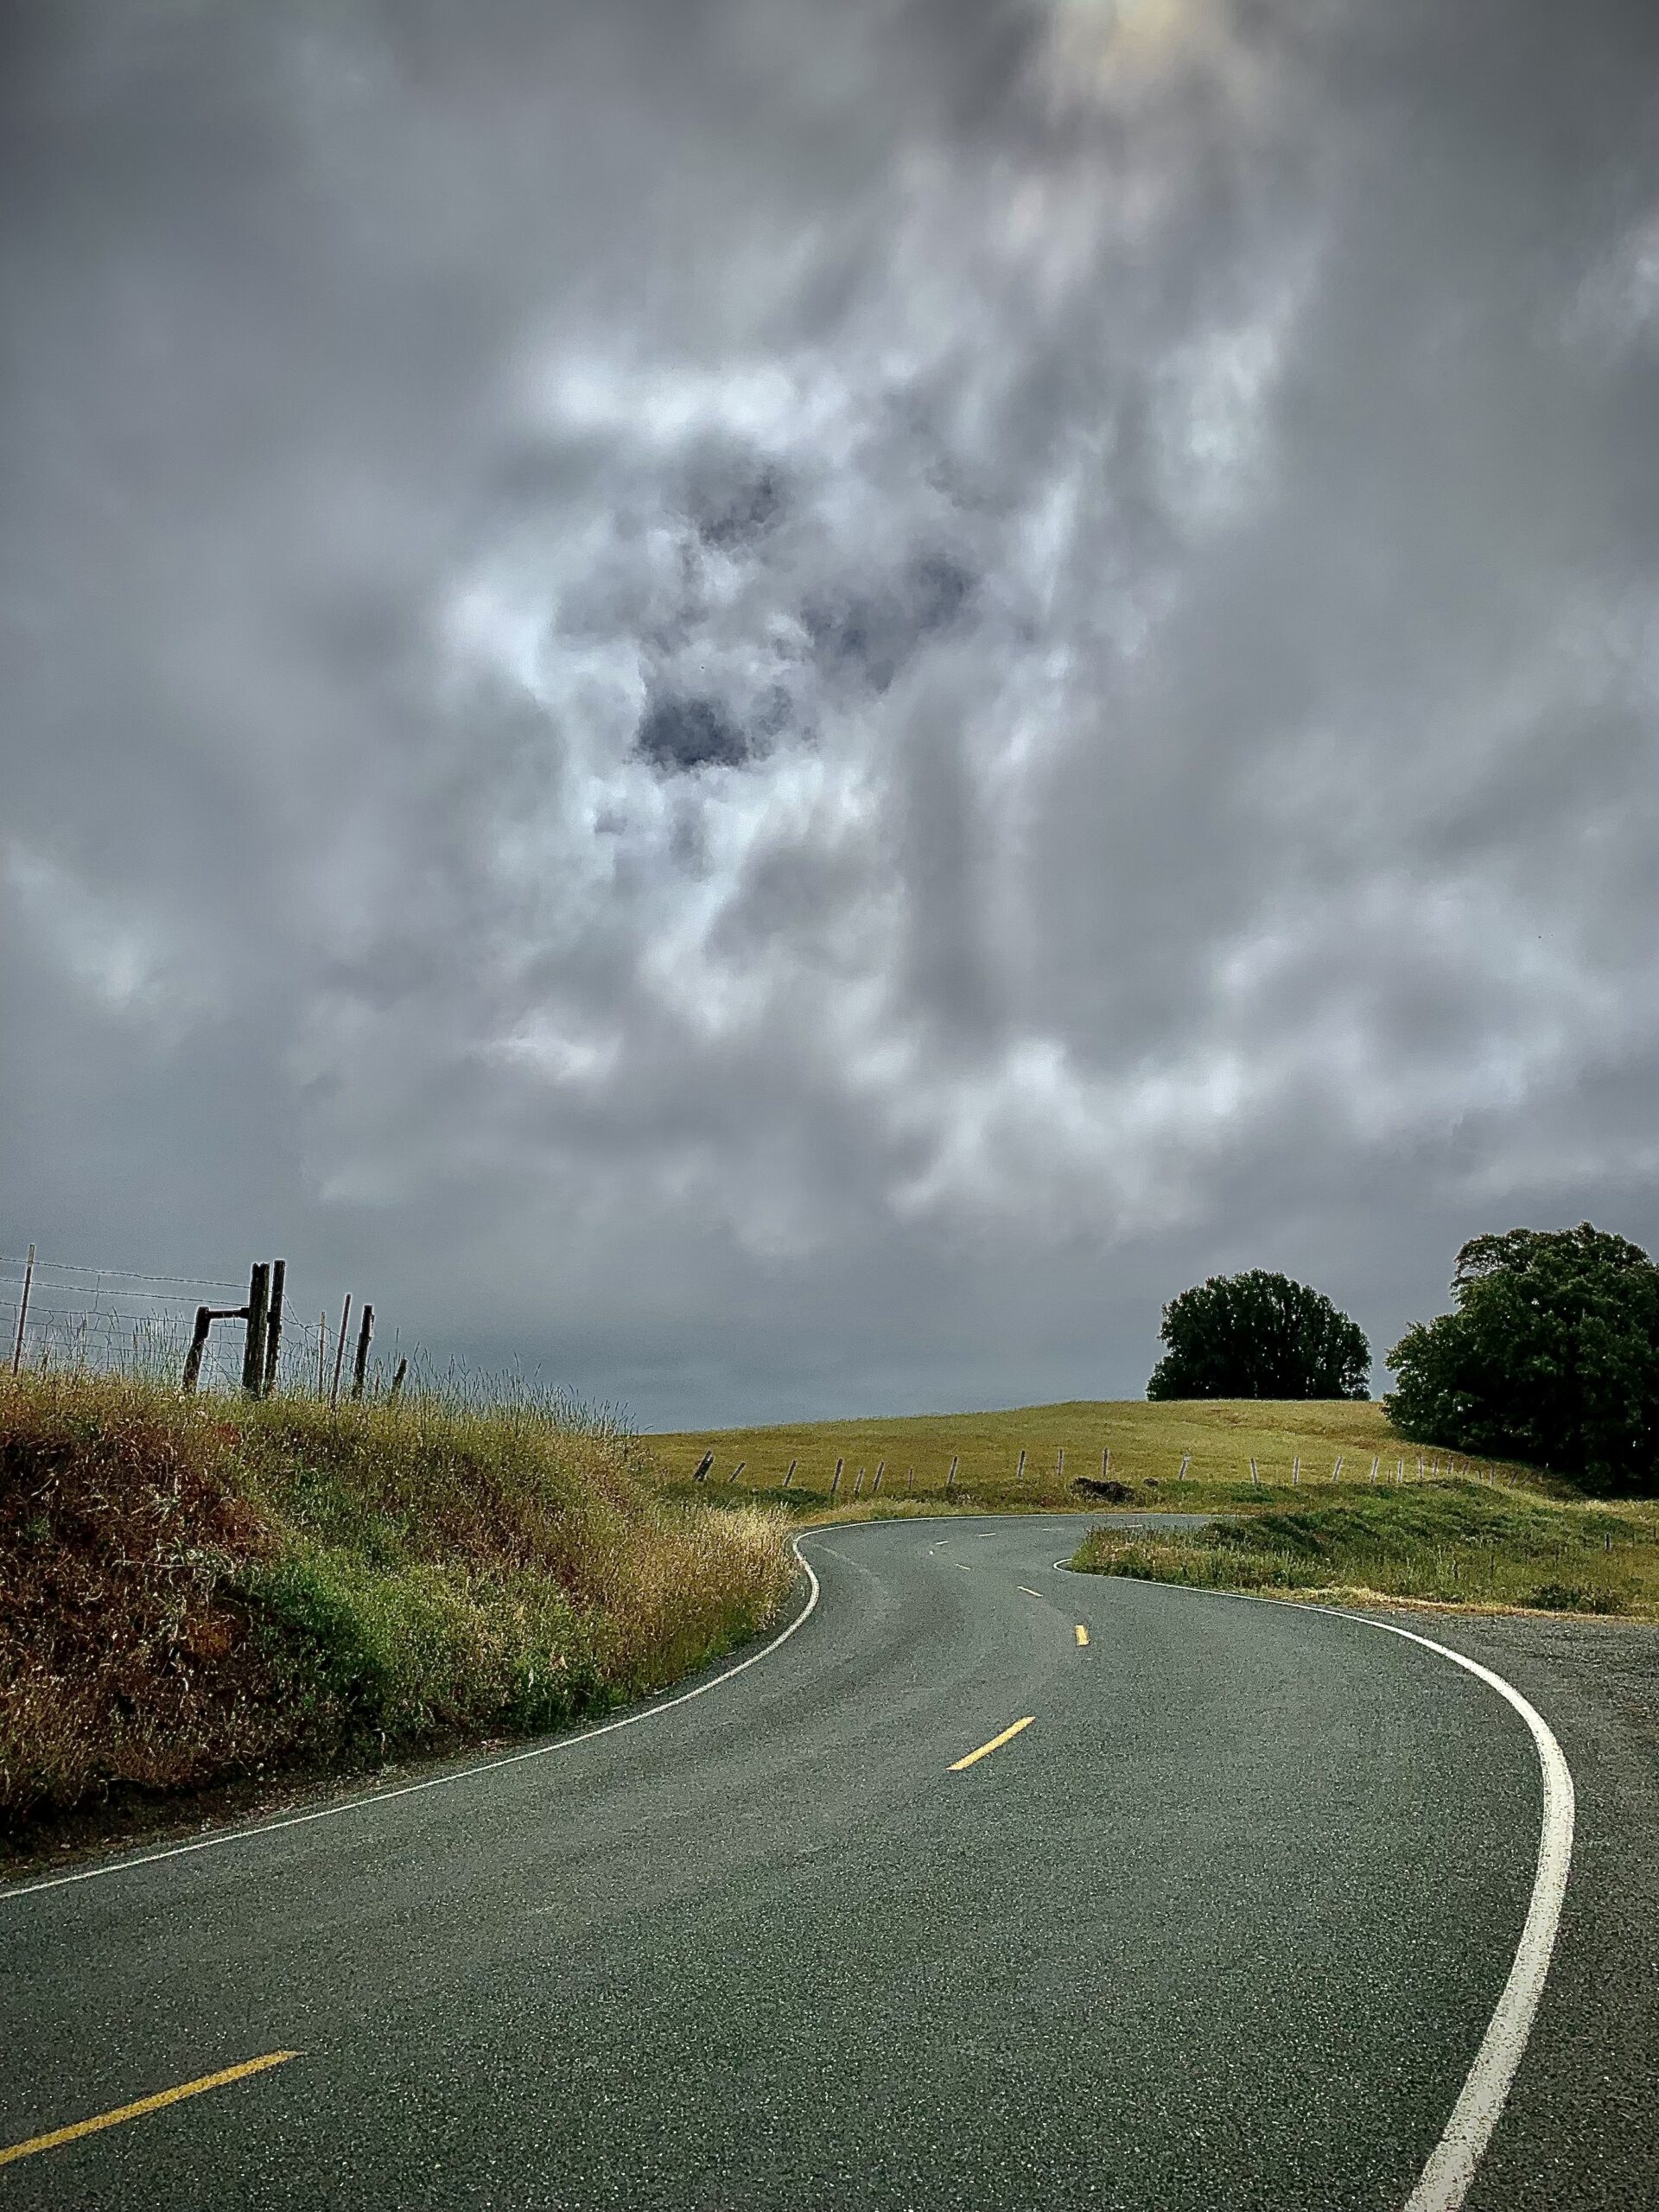 An empty road under a cloudy sky.